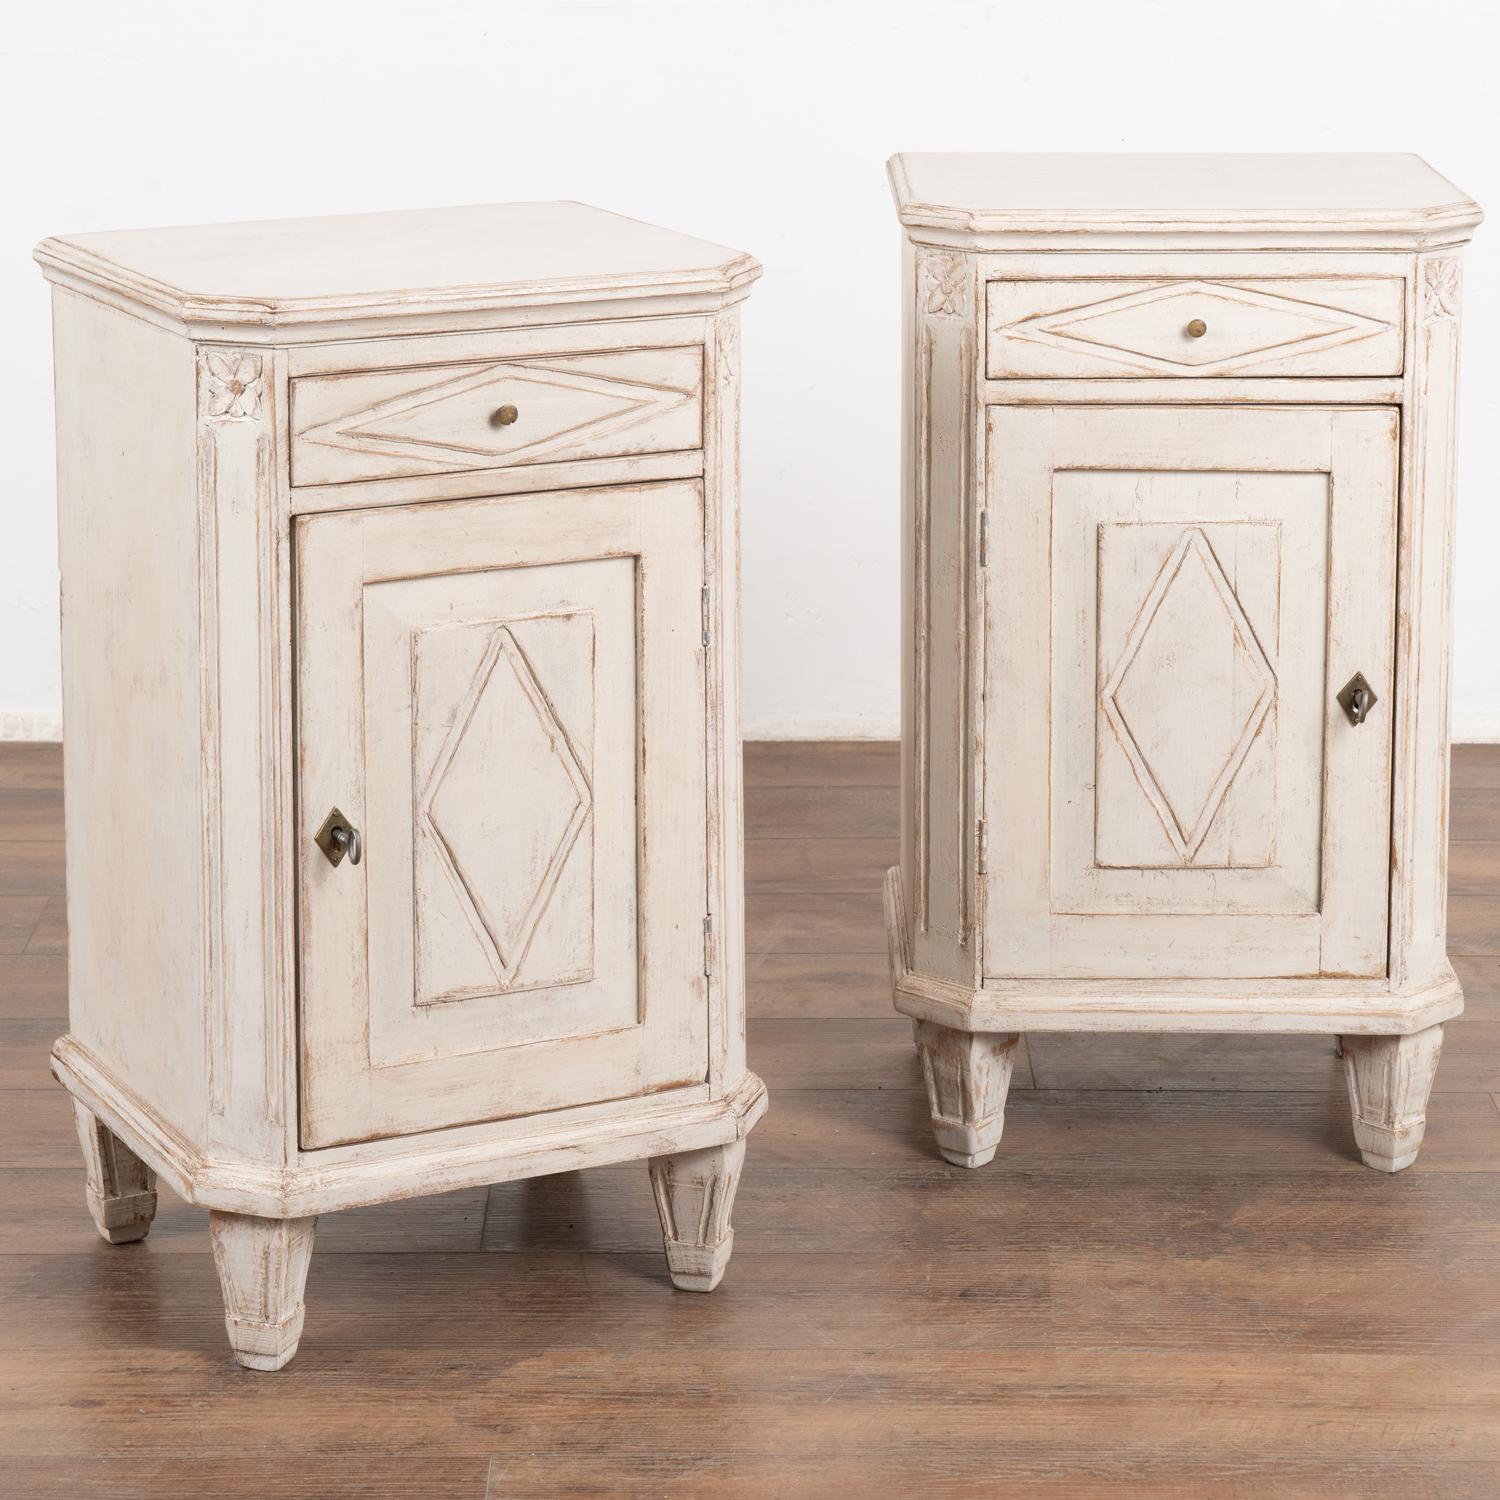 Pair, small Swedish country Gustavian style white painted nightstands or small cabinets standing on tapered feet.
Traditional diamond motif on doors and drawers, simple fluted carving along sides.
Newer professionally applied antique white painted